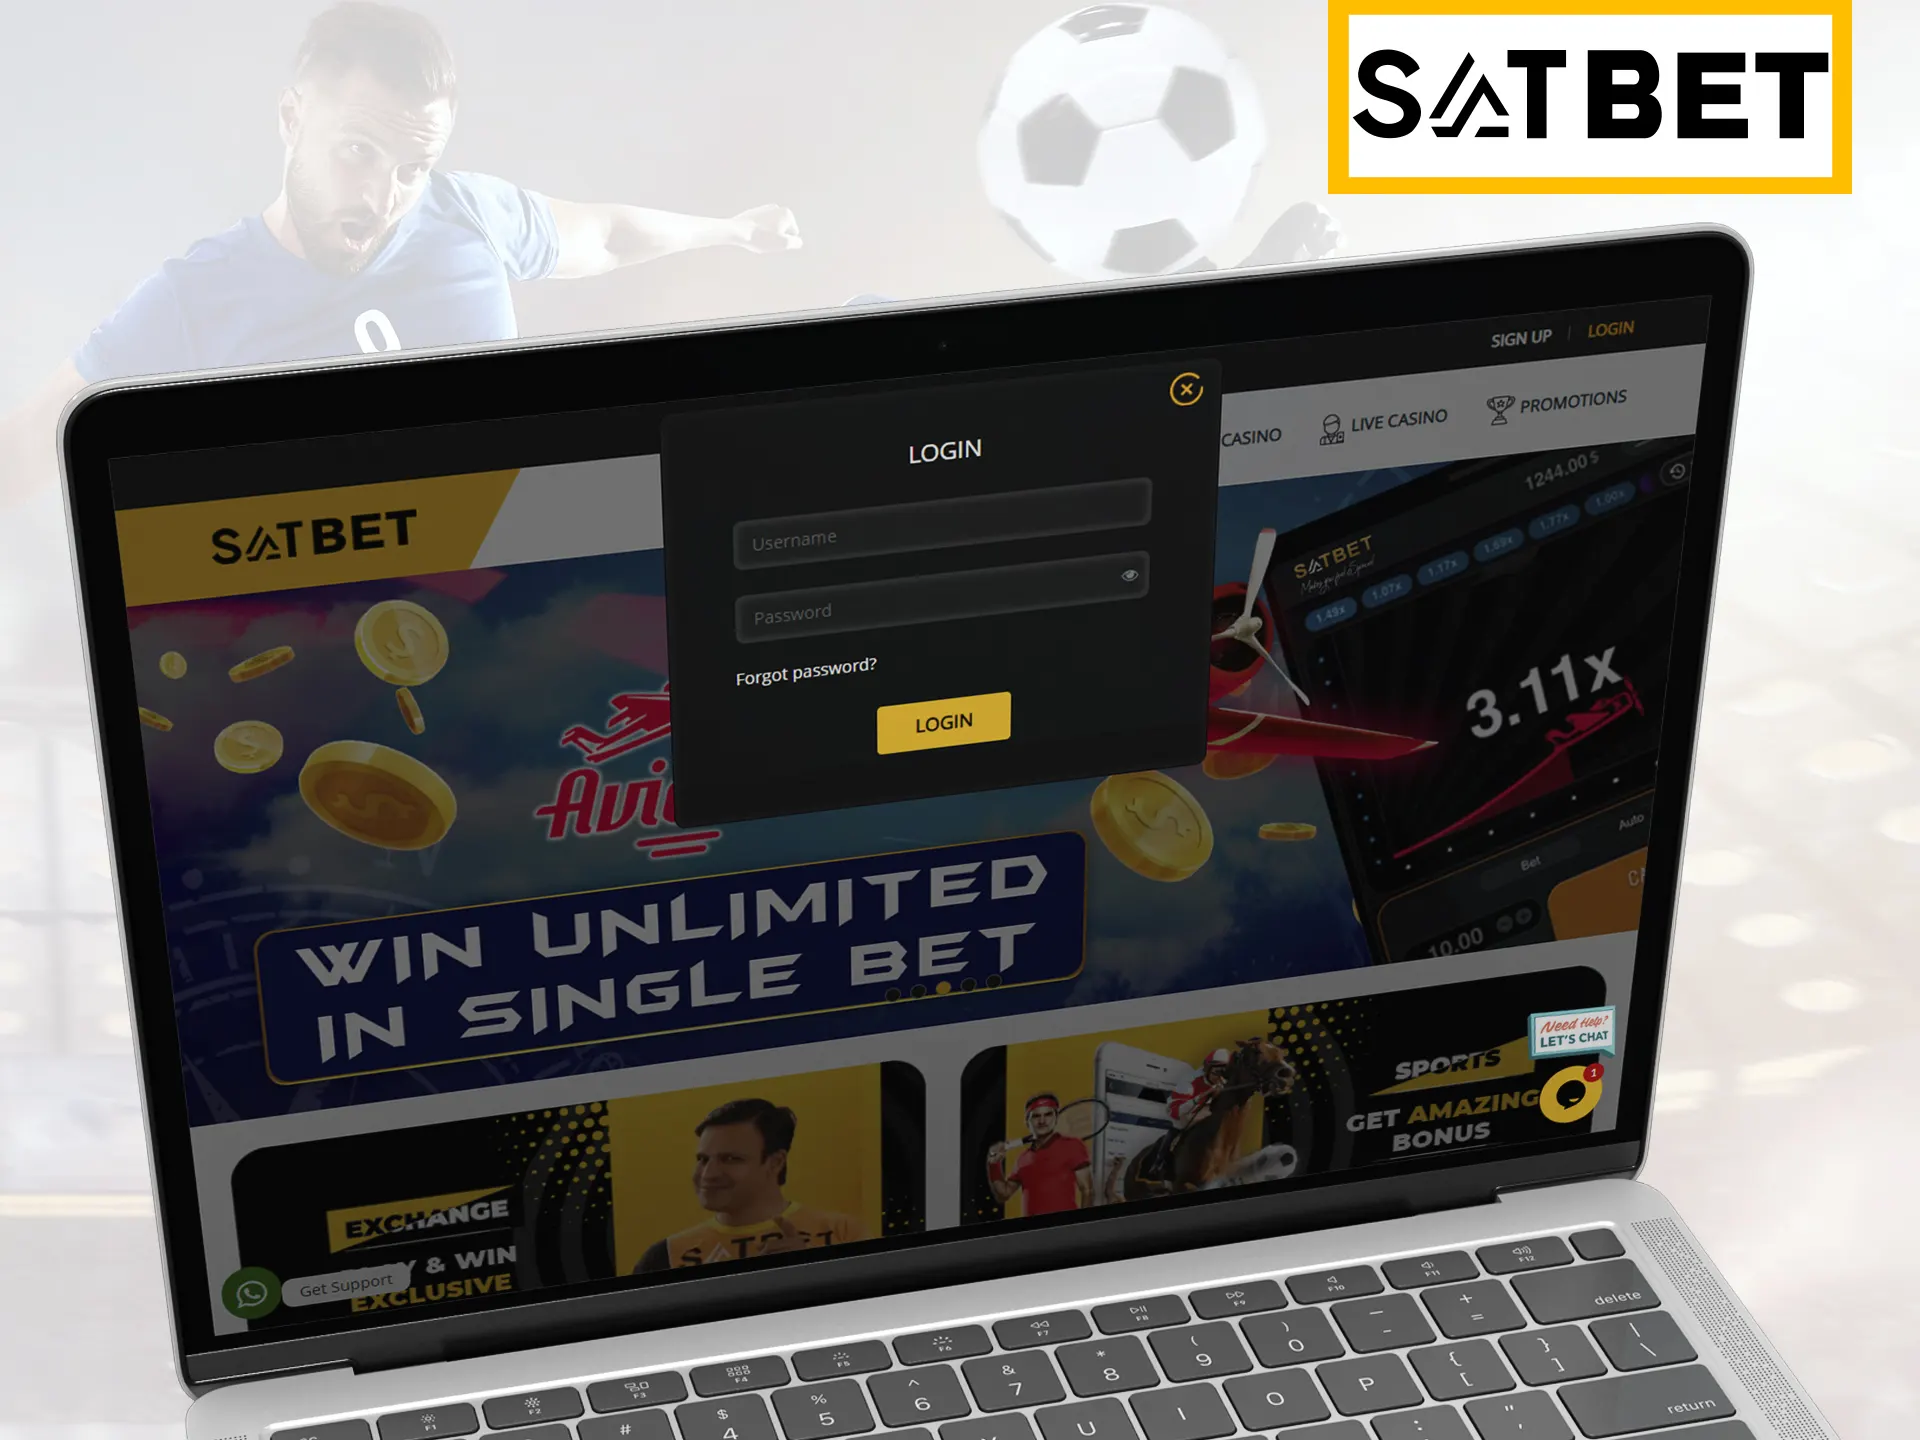 Use your Satbet account for log in.